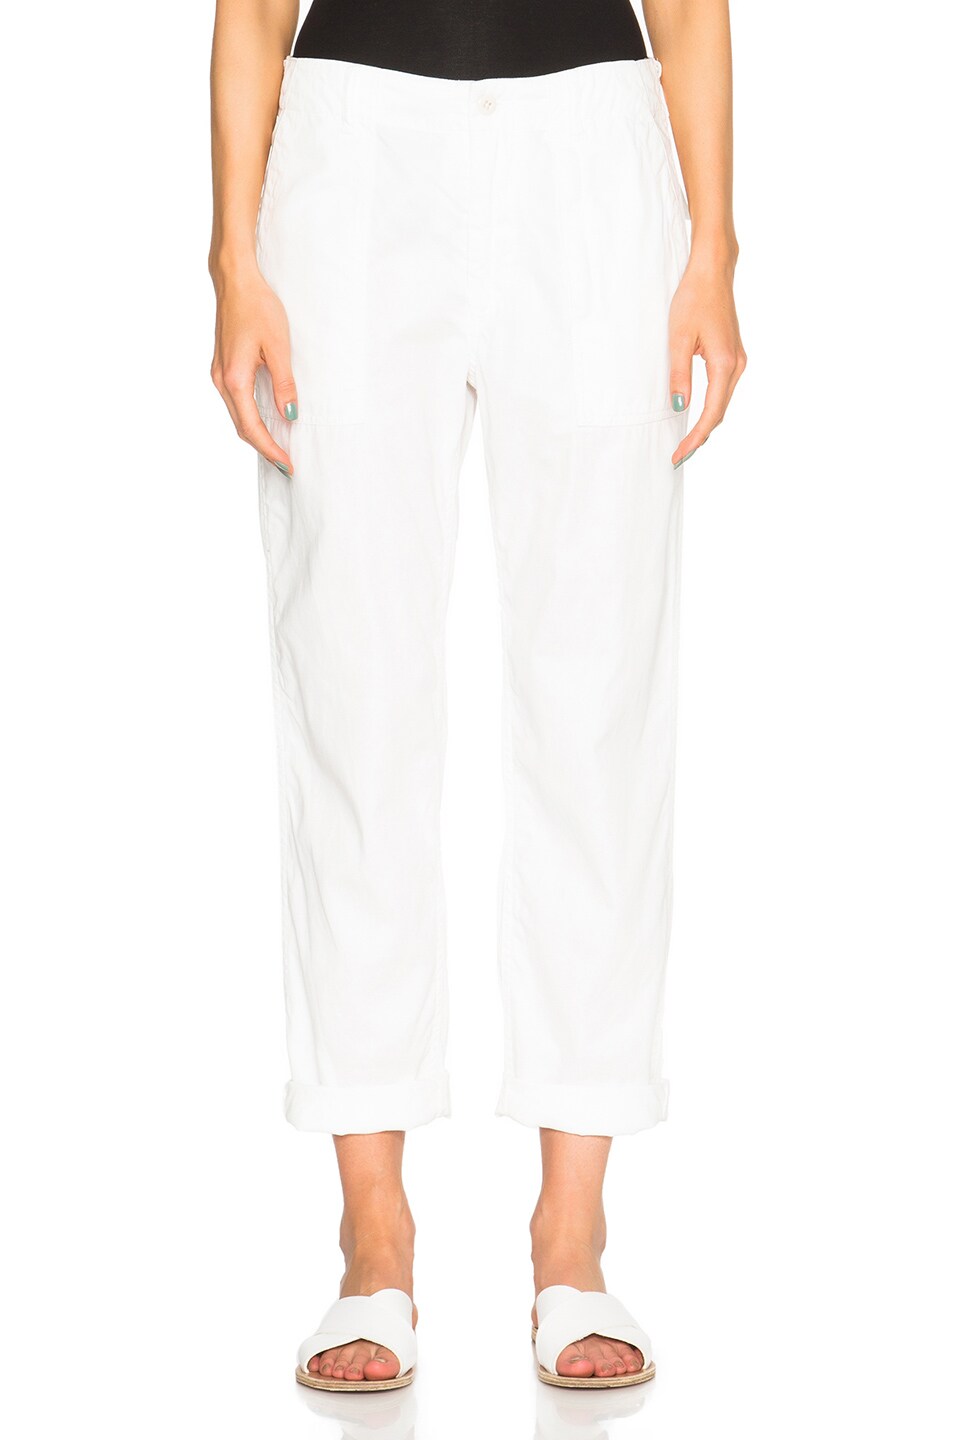 Image 1 of Engineered Garments Fatigue Pants in White Twill